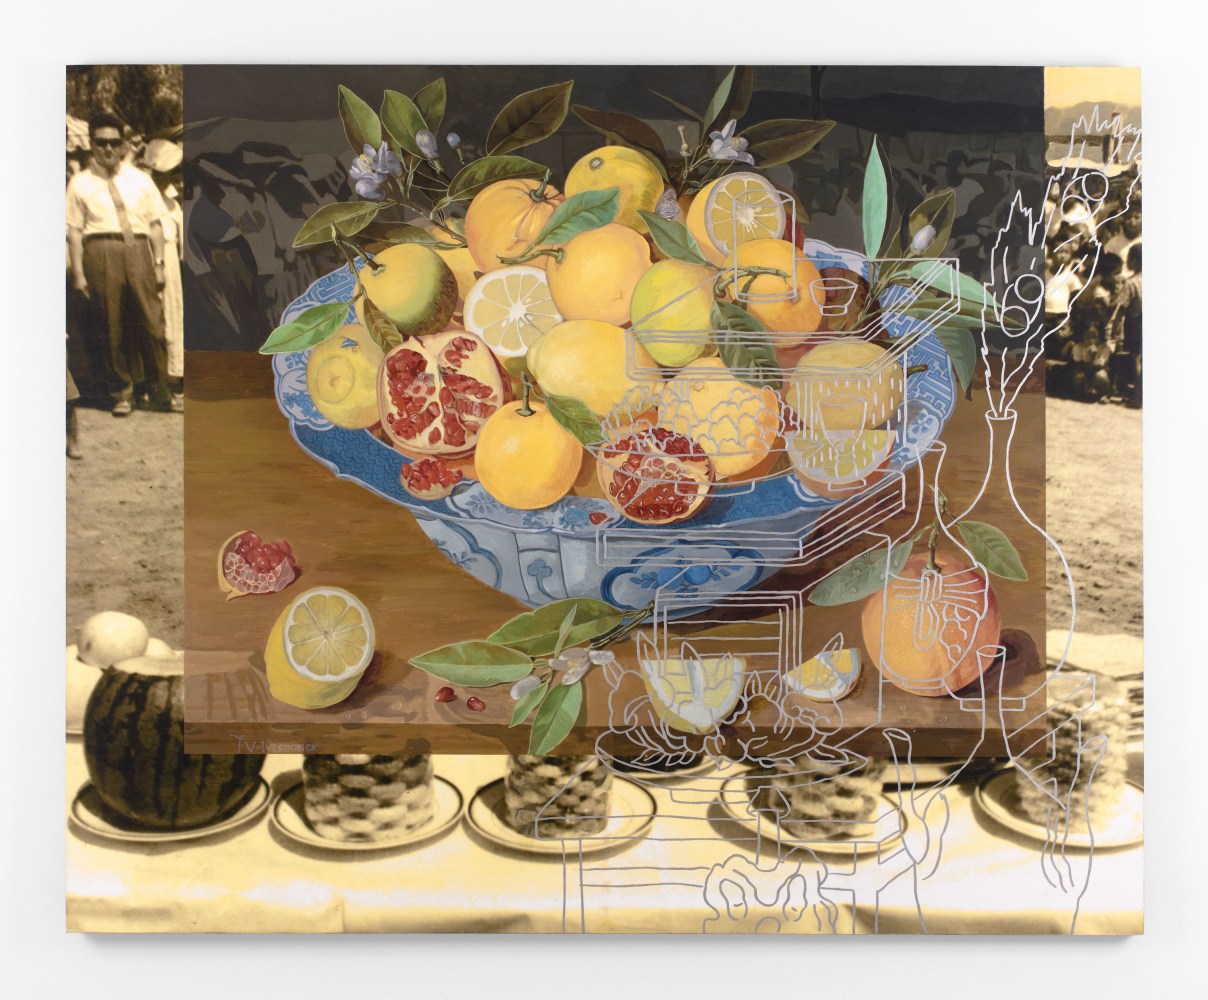 A bowl of fruit with centered in a scene with a white outline of vases and assorted boxes on the proper left, overlay an image of a table with men and children in the background.